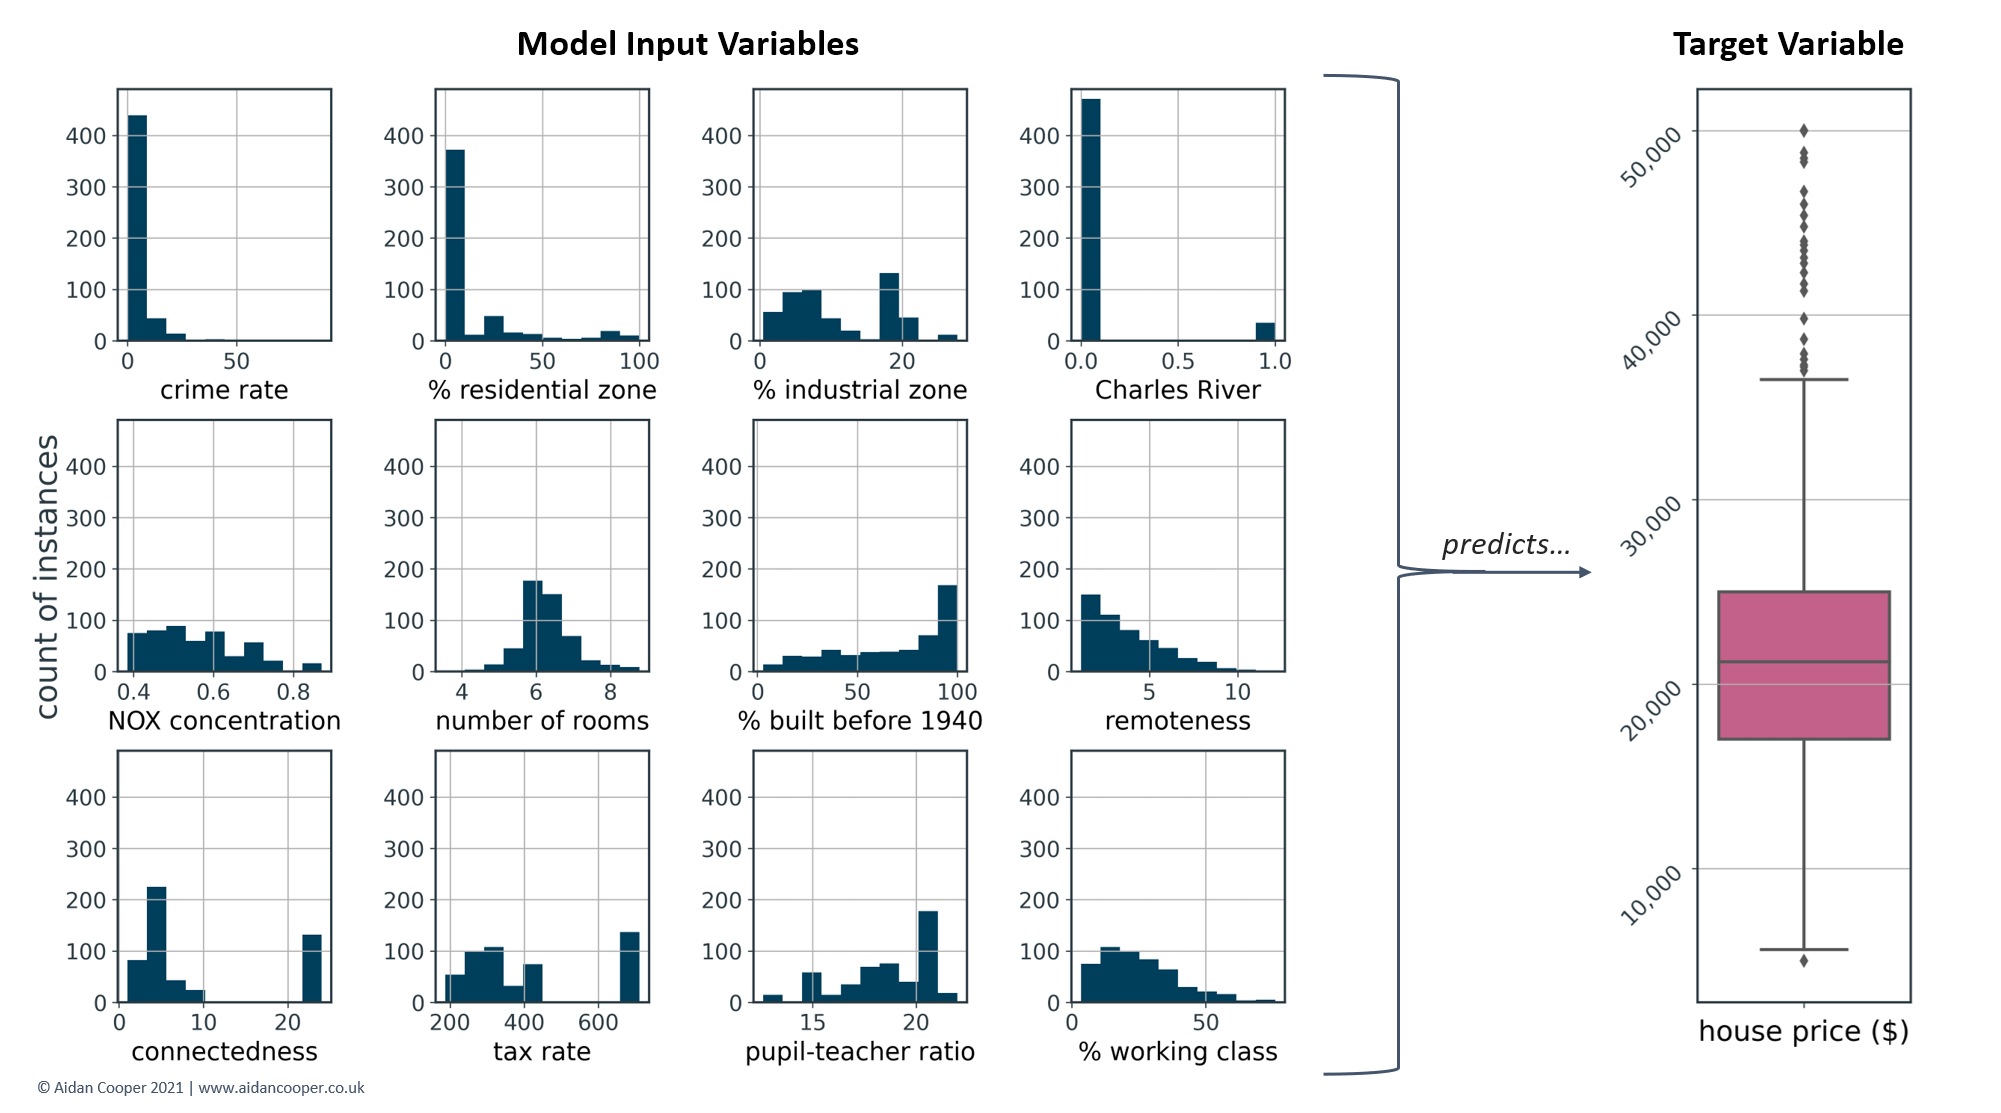 Explaining Machine Learning Models: A Non-Technical Guide to Interpreting SHAP Analyses